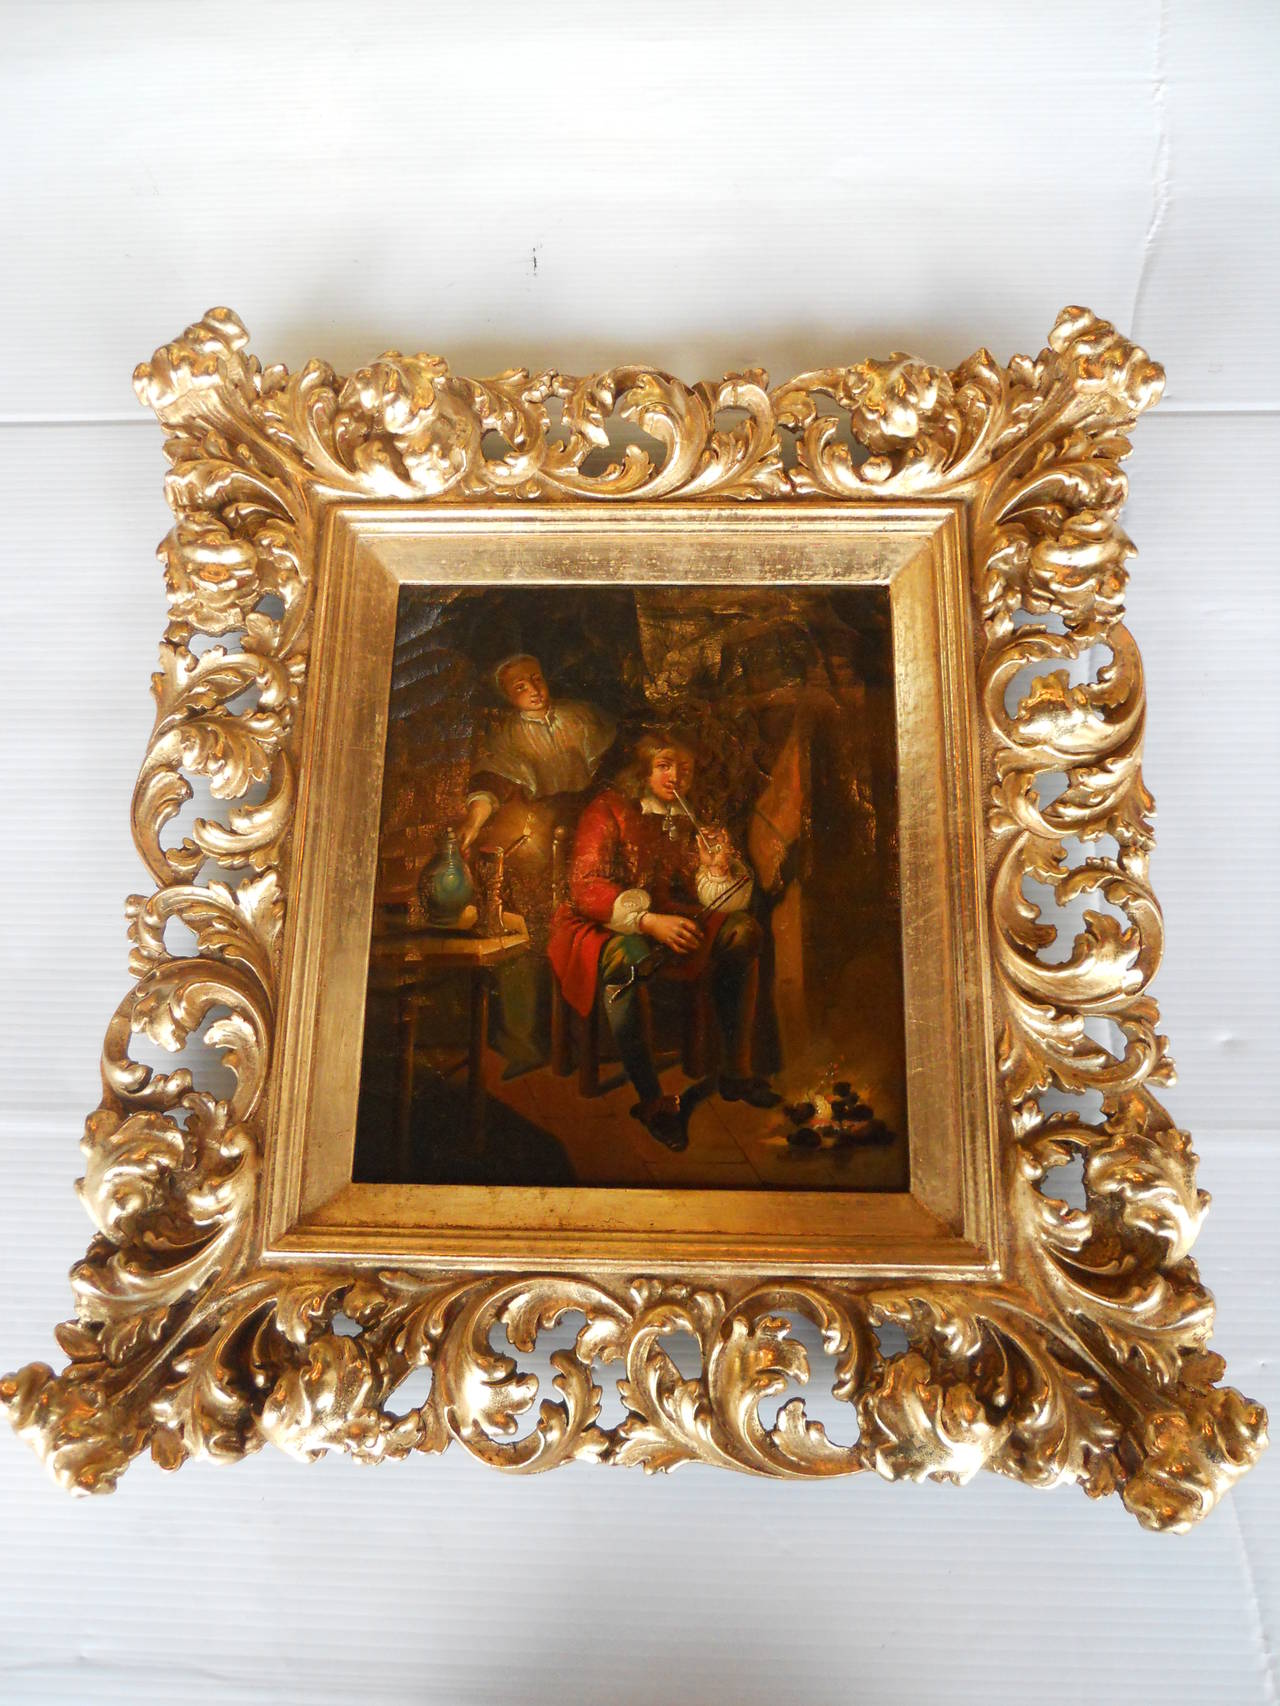 Pair of 18th century German paintings.
The measurements below are for the painting without the frame.
The overall measurement of each painting with the existing frame as show on the pics: 20